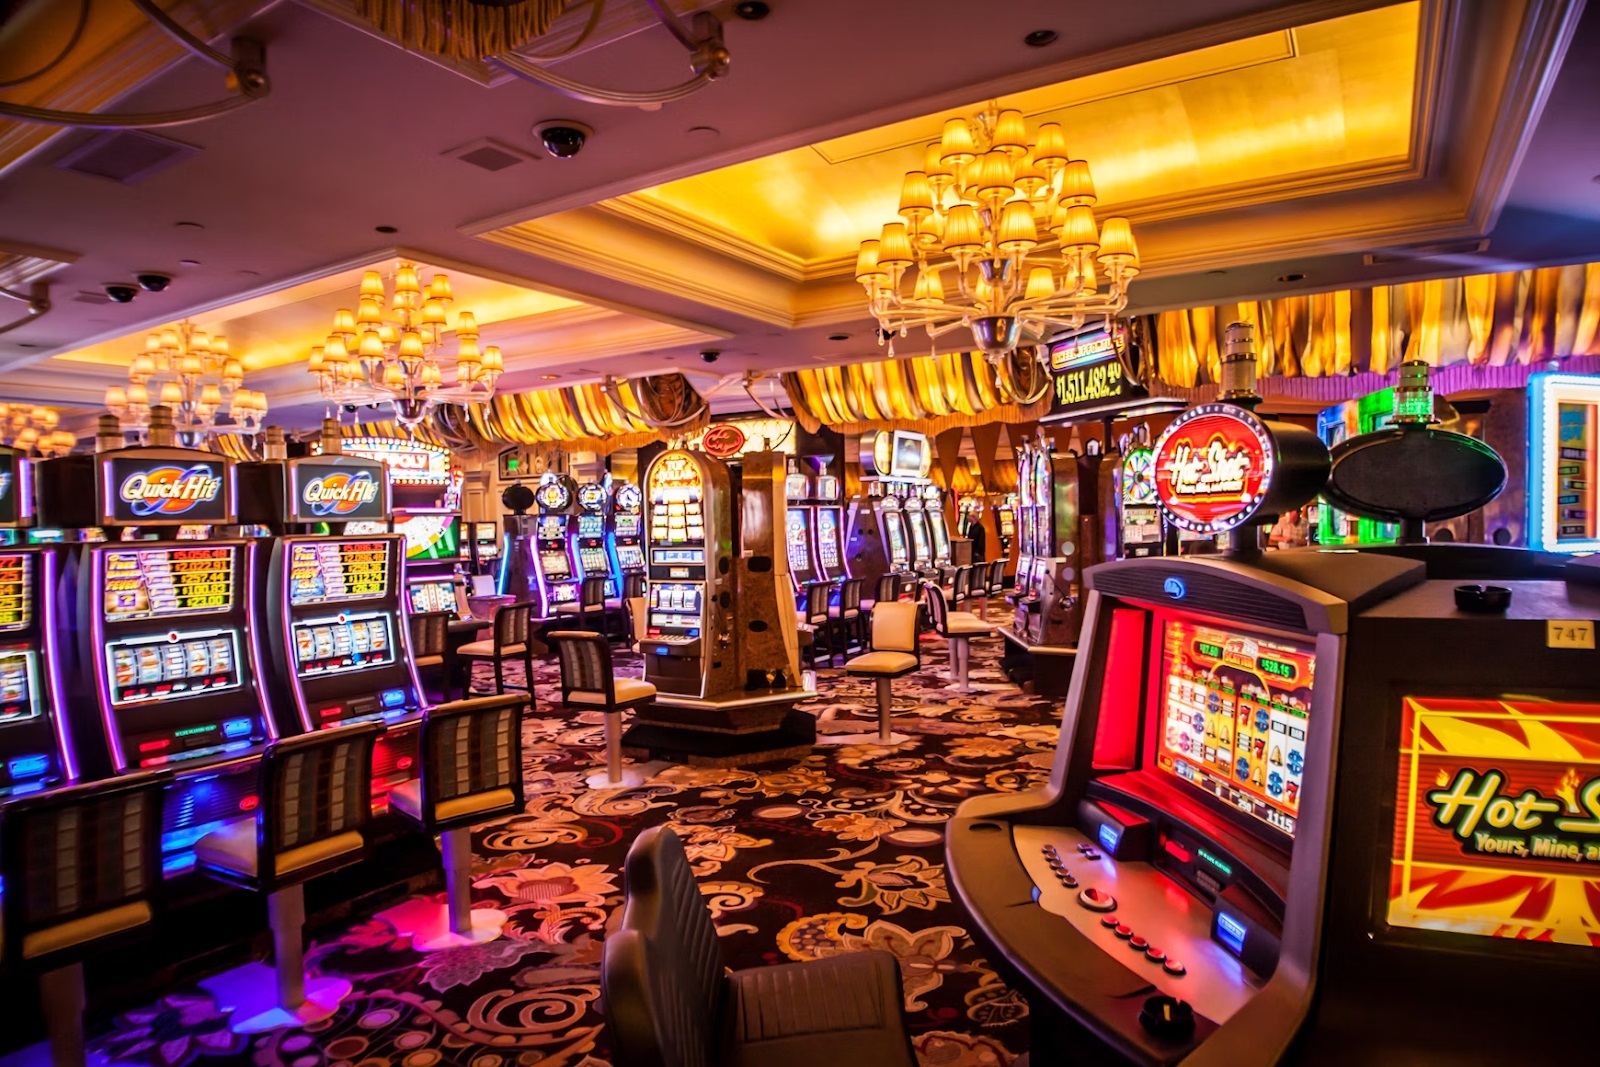 Behind the Glamour: The Business and Economics of Running a Casino